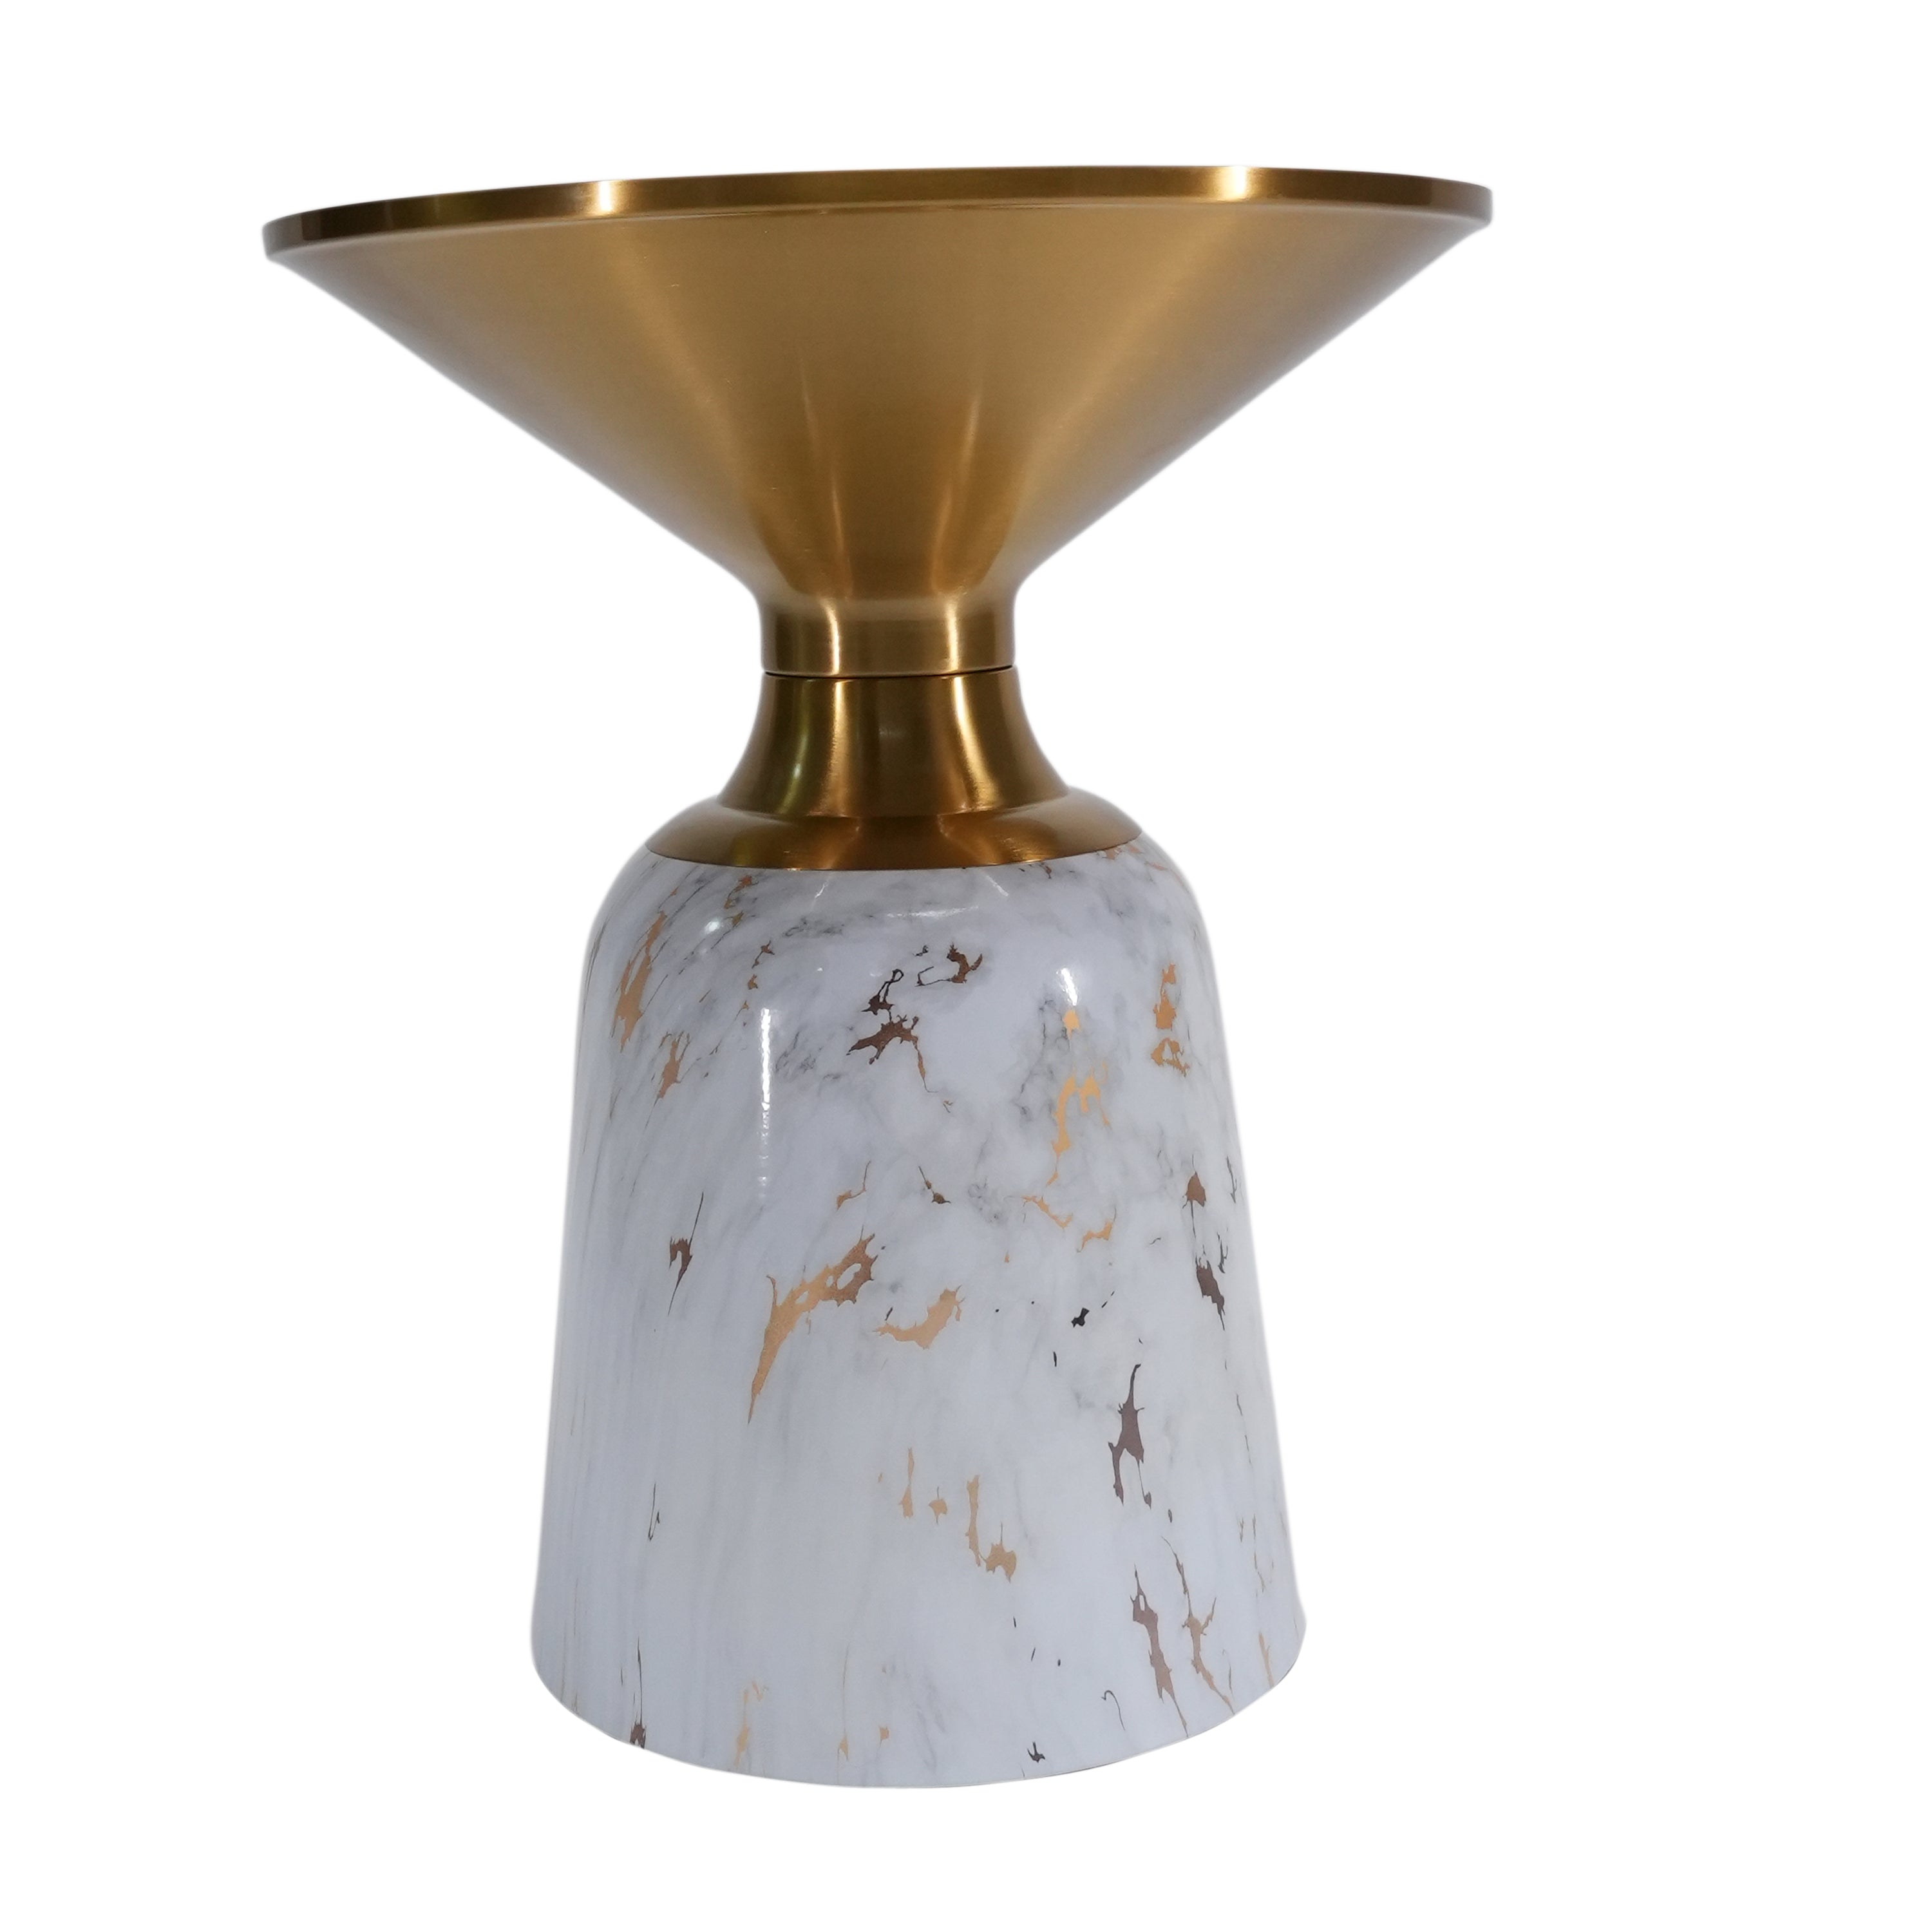 Castor Small Side With Marble Top And Metal Base - White With Gold